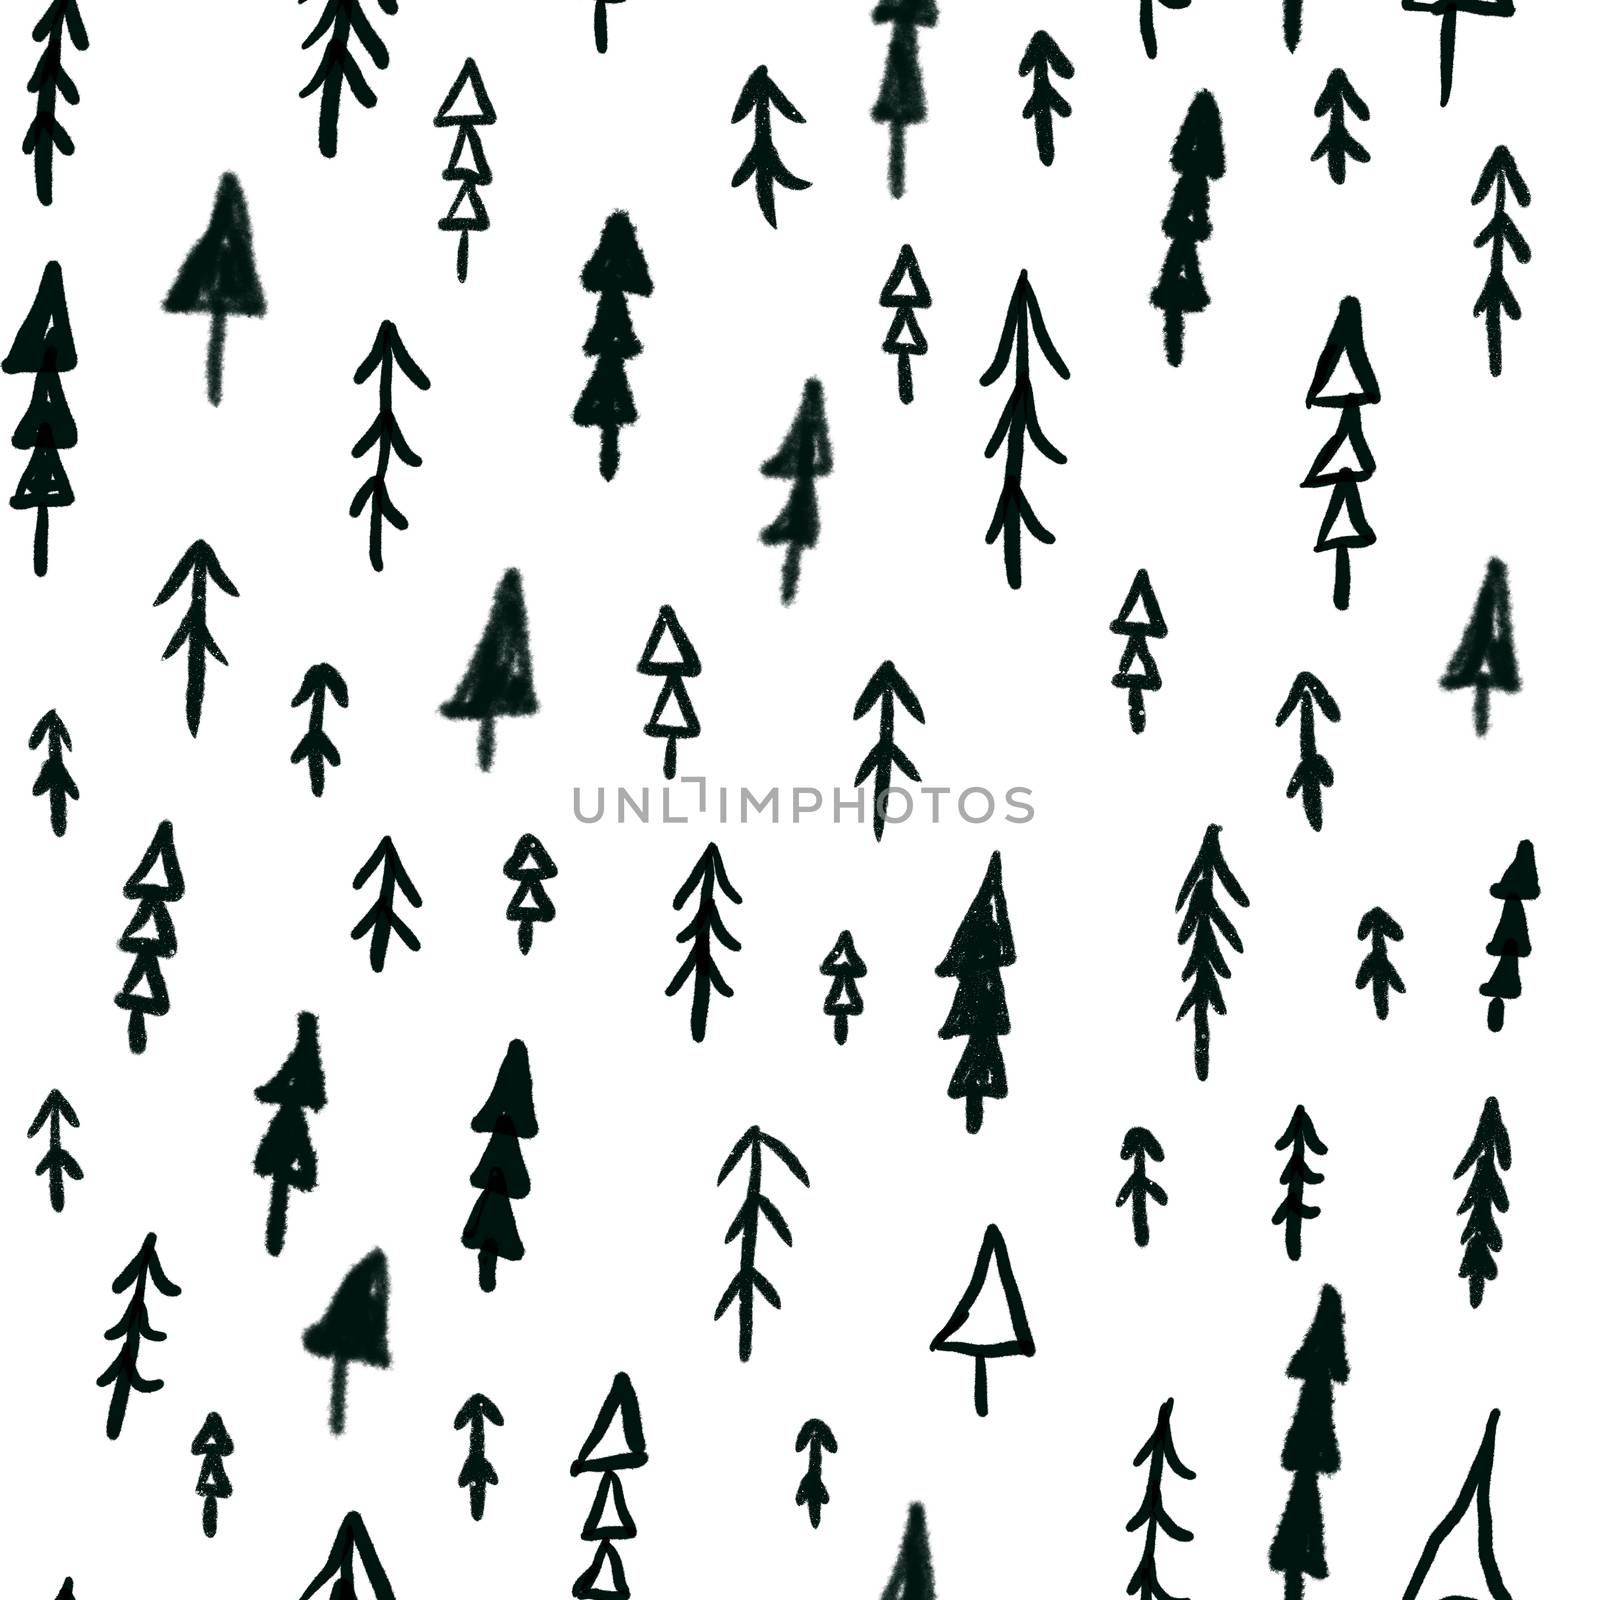 Hand drawn Christmas tree seamless pattern on white background. Festive endless background. Doodle ink repeat pattern design for for scrapbooking, cards, wrapping paper, wallpaper.